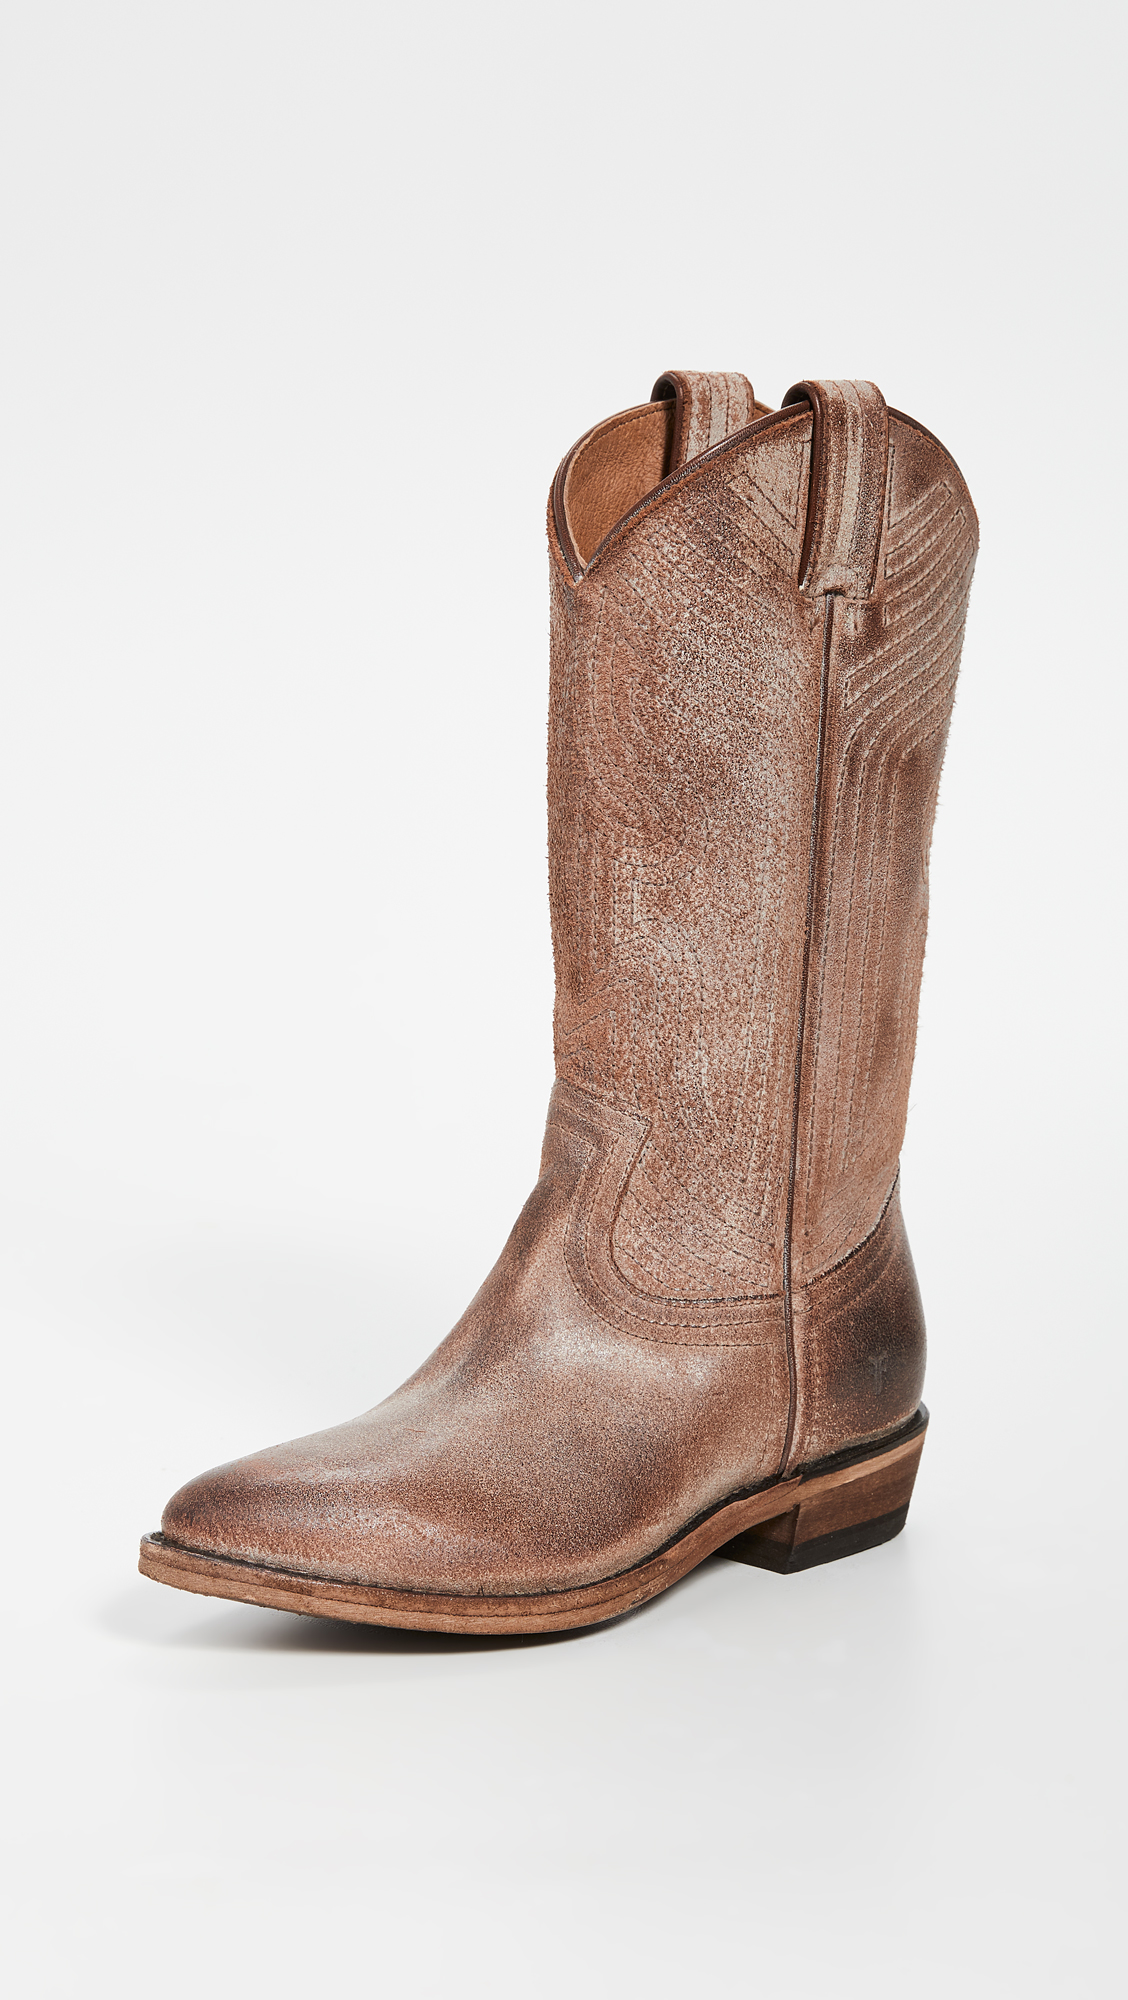 quality cowboy boot brands